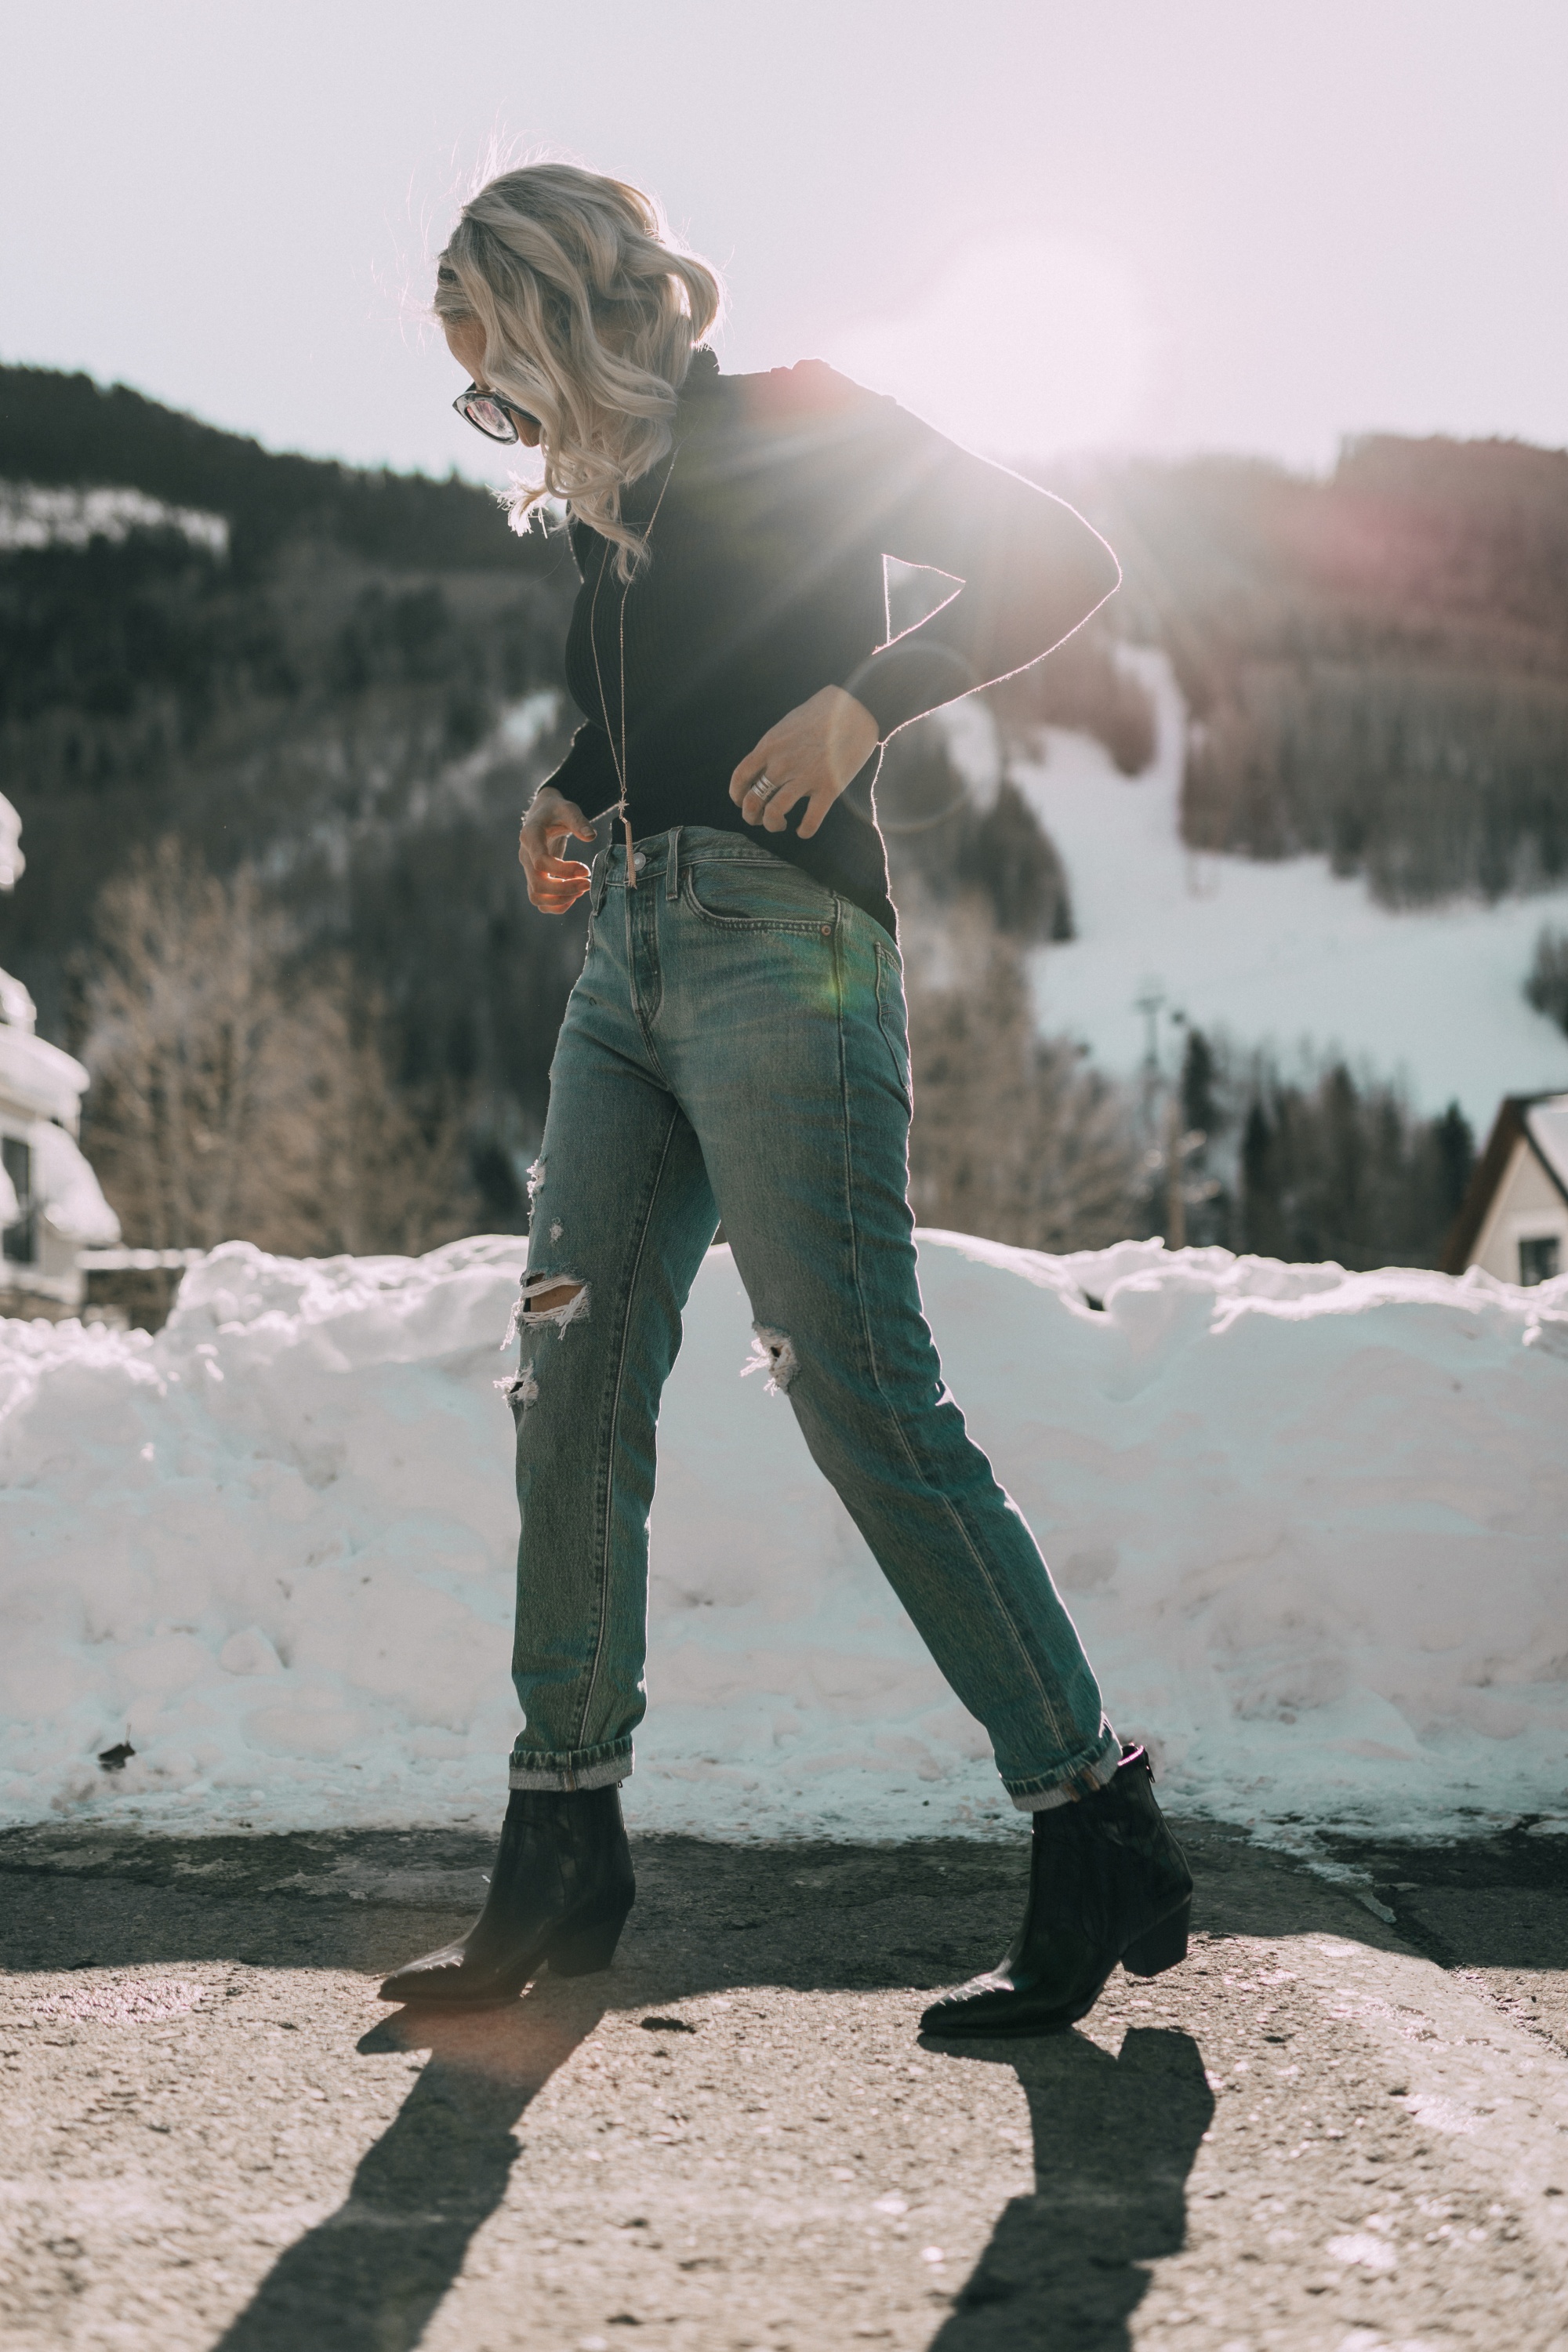 Levi jeans, fashion blogger Erin Busbee of BusbeeStyle.com wearing Levi's Mile High Super Skinny Jeans with a black puff sleeve pullover sweater and black croc-embossed boots from JCPenney in Telluride, Colorado